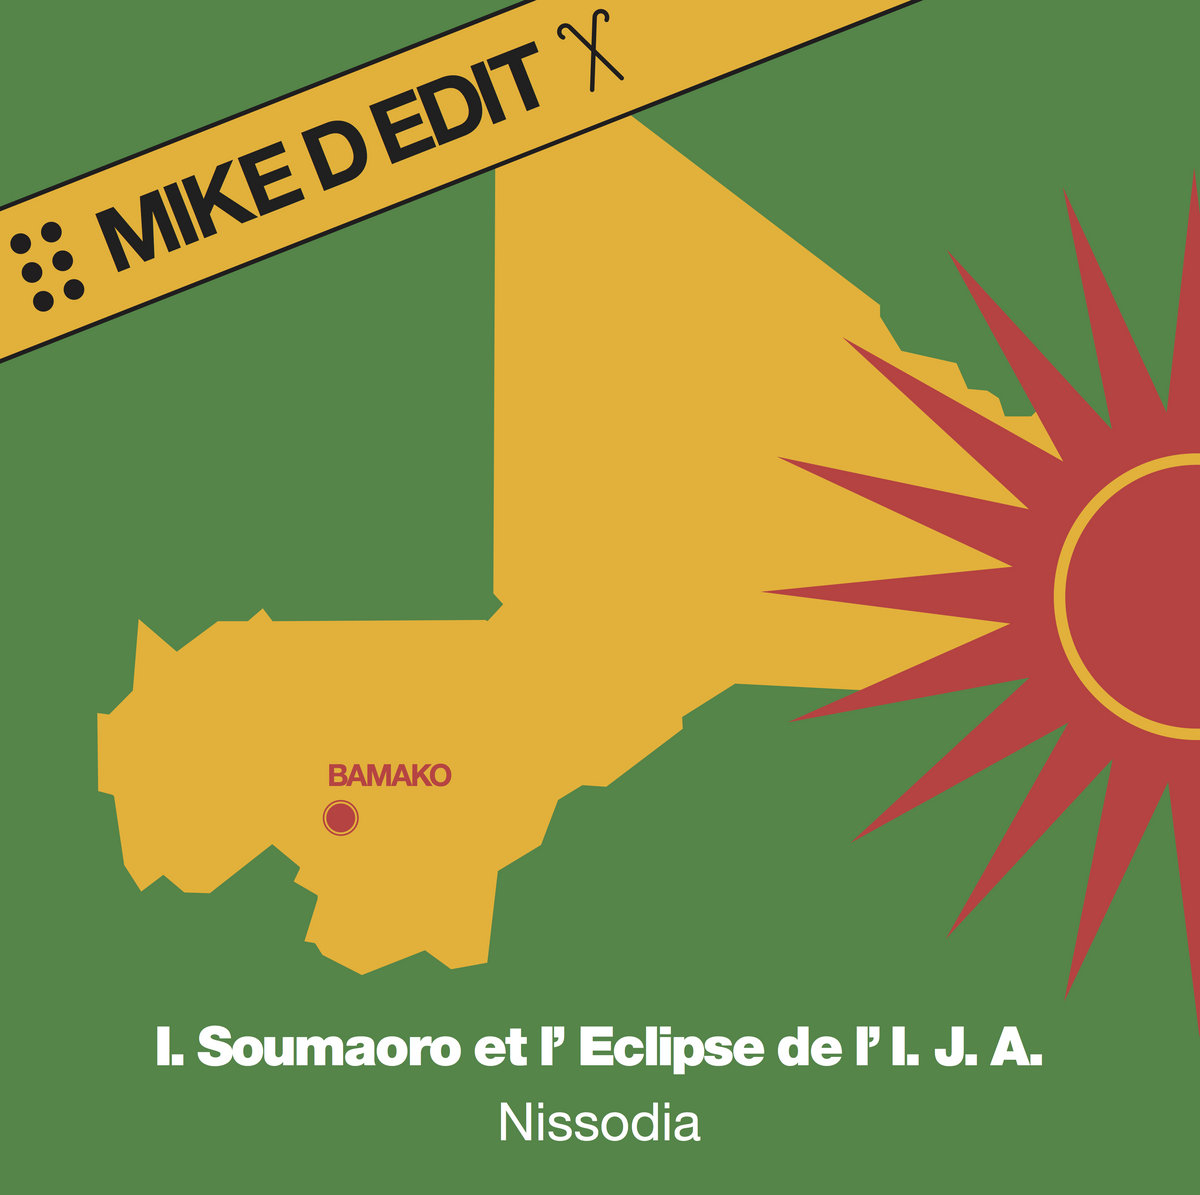 Idrissa Soumaoro – Nissodia (Mike D Remix)Idrissa is a big deal in Mali: learned his trade with Salif Keita, helped to invent Amadou and Mariam, and he teaches music to blind and disabled kids. He’s been knighted there too. This Mike D mix came out on Mr Bongo last year.